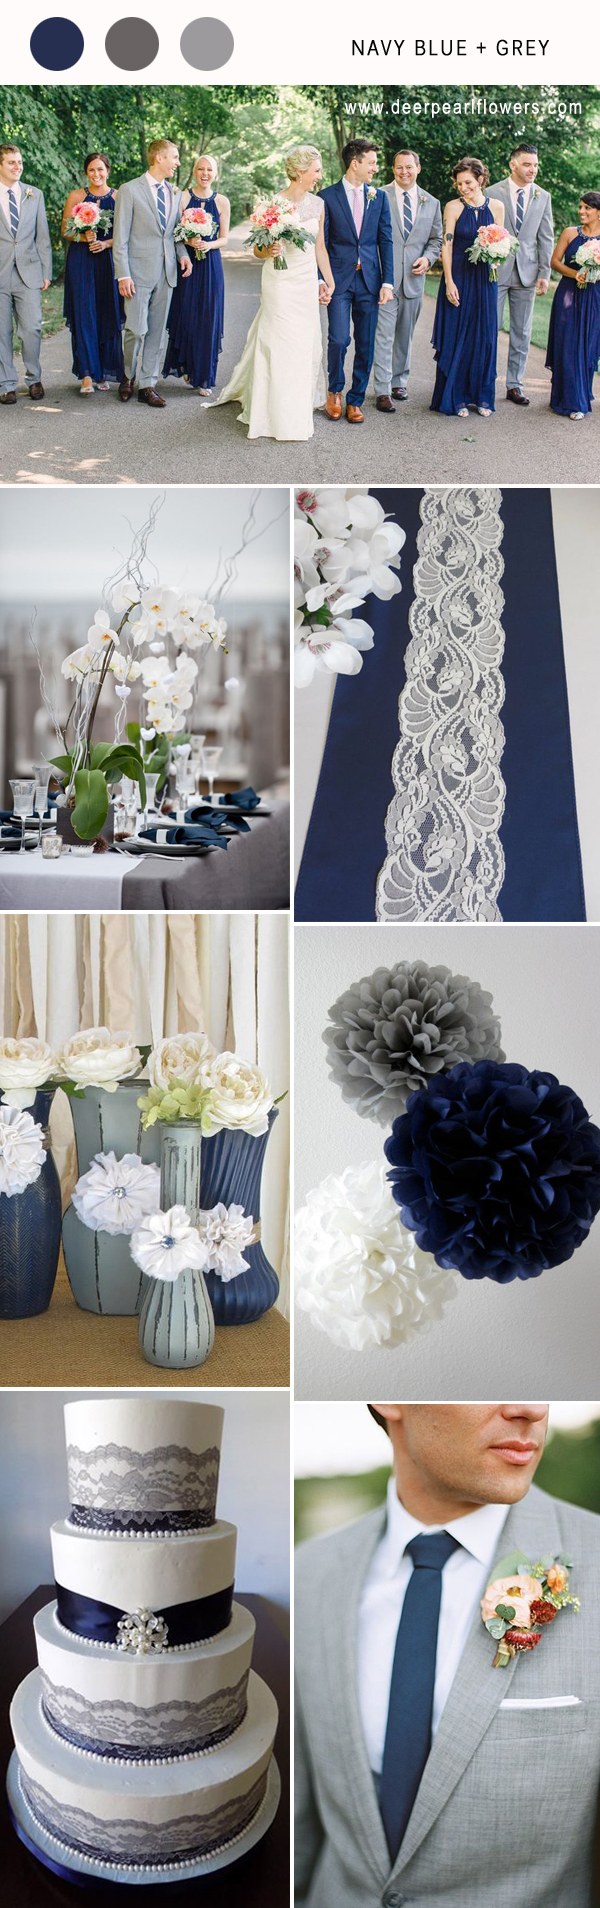 navy blue and grey wedding color combo ideas for 2018